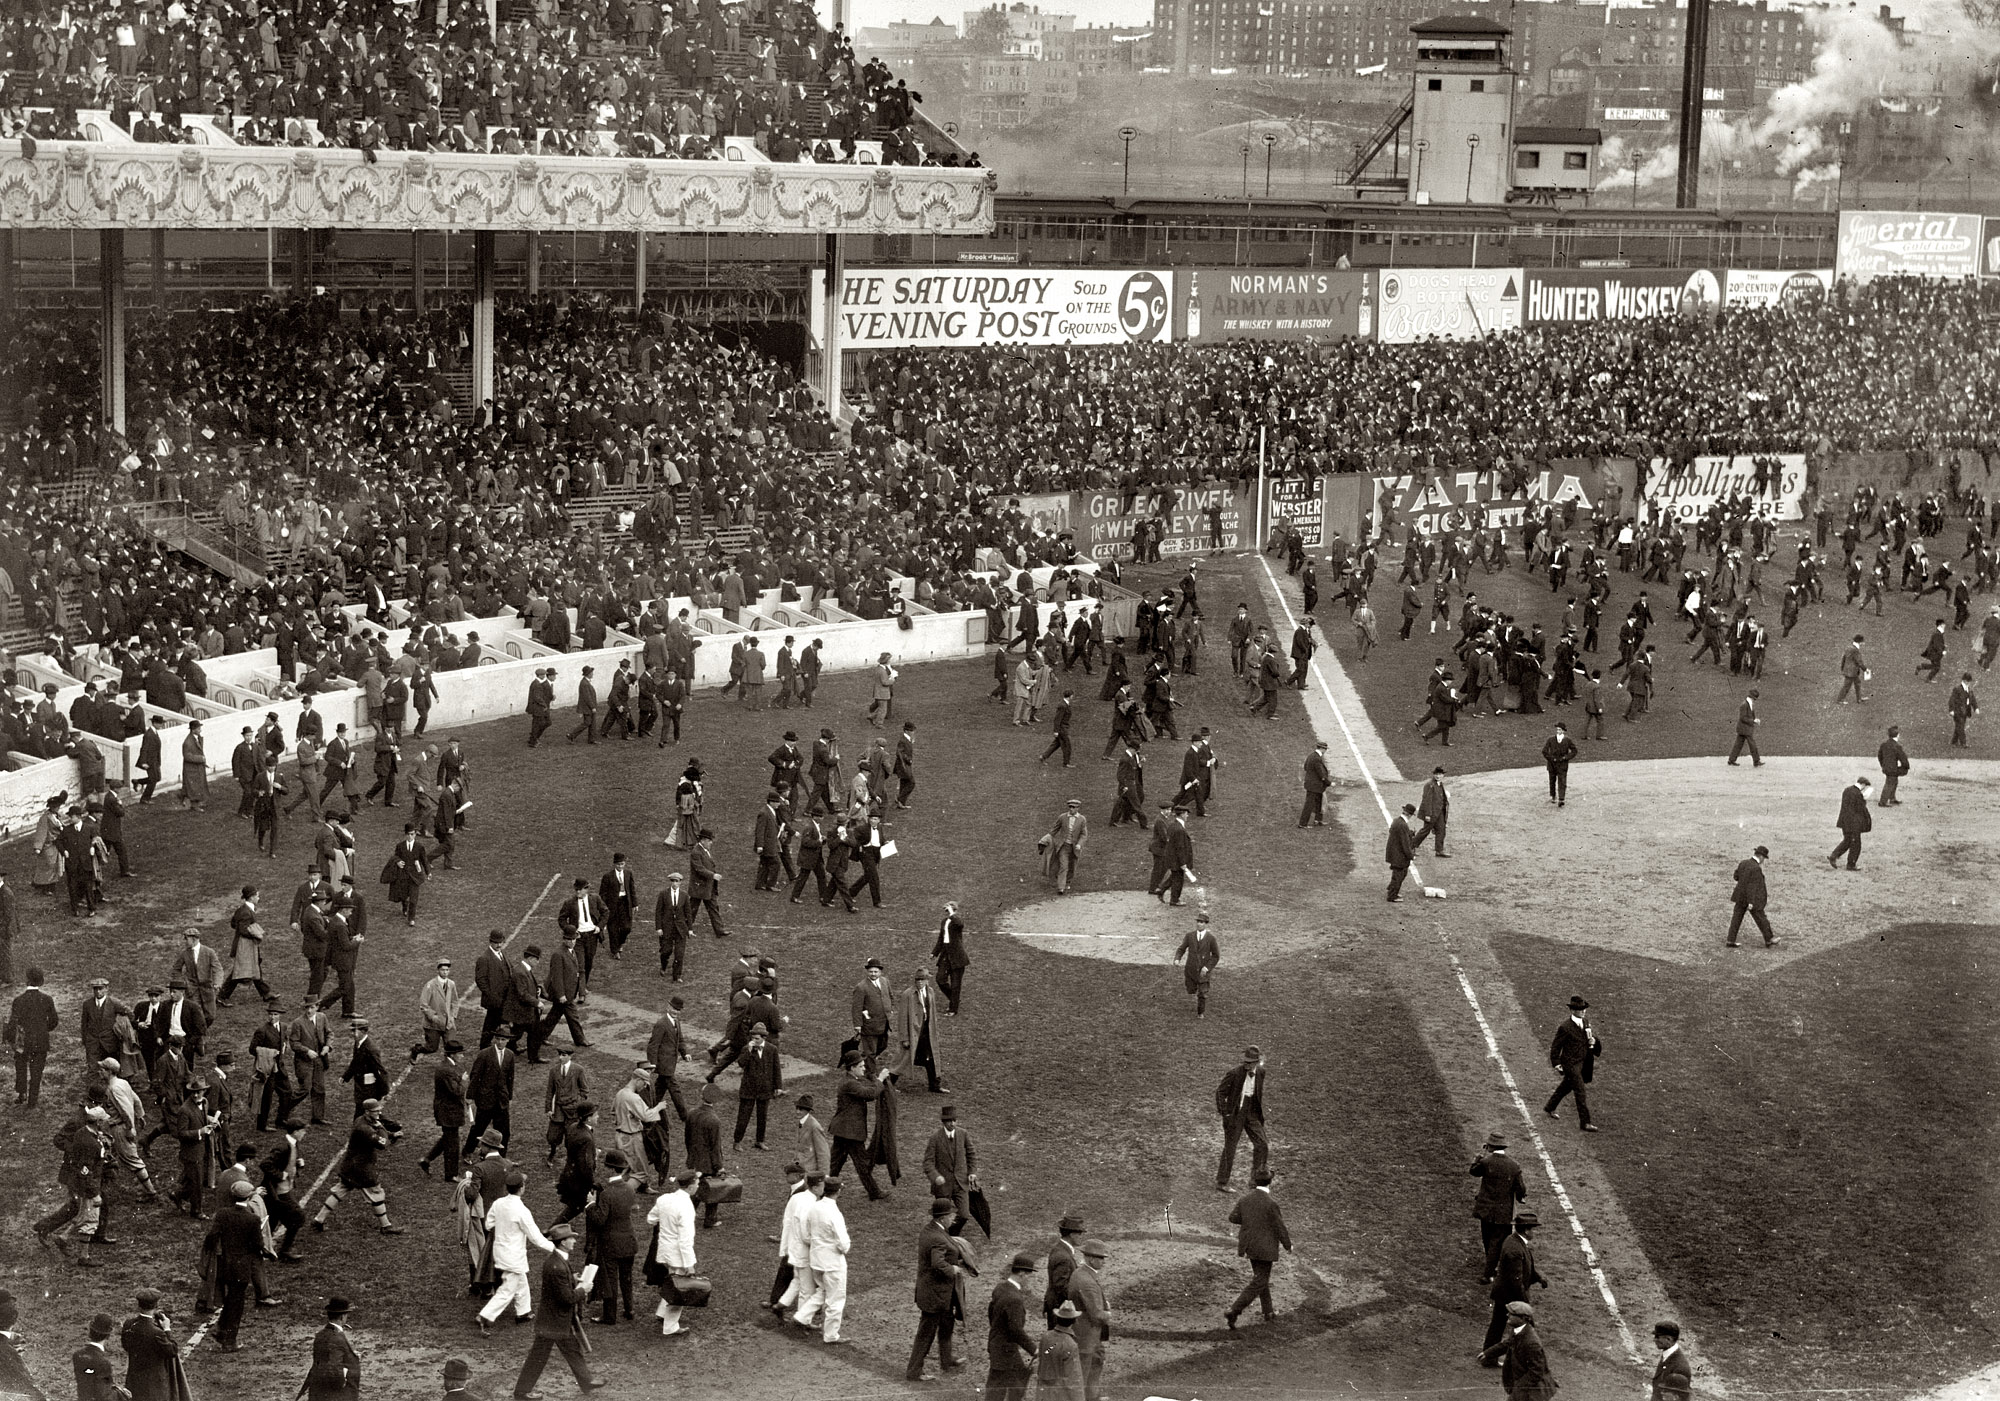 October 9, 1913. The scene at the Polo Grounds in New York after the third game of the World Series. Philadelphia Athletics 8, New York Giants 2. View full size. 5x7 glass negative, George Grantham Bain Collection.